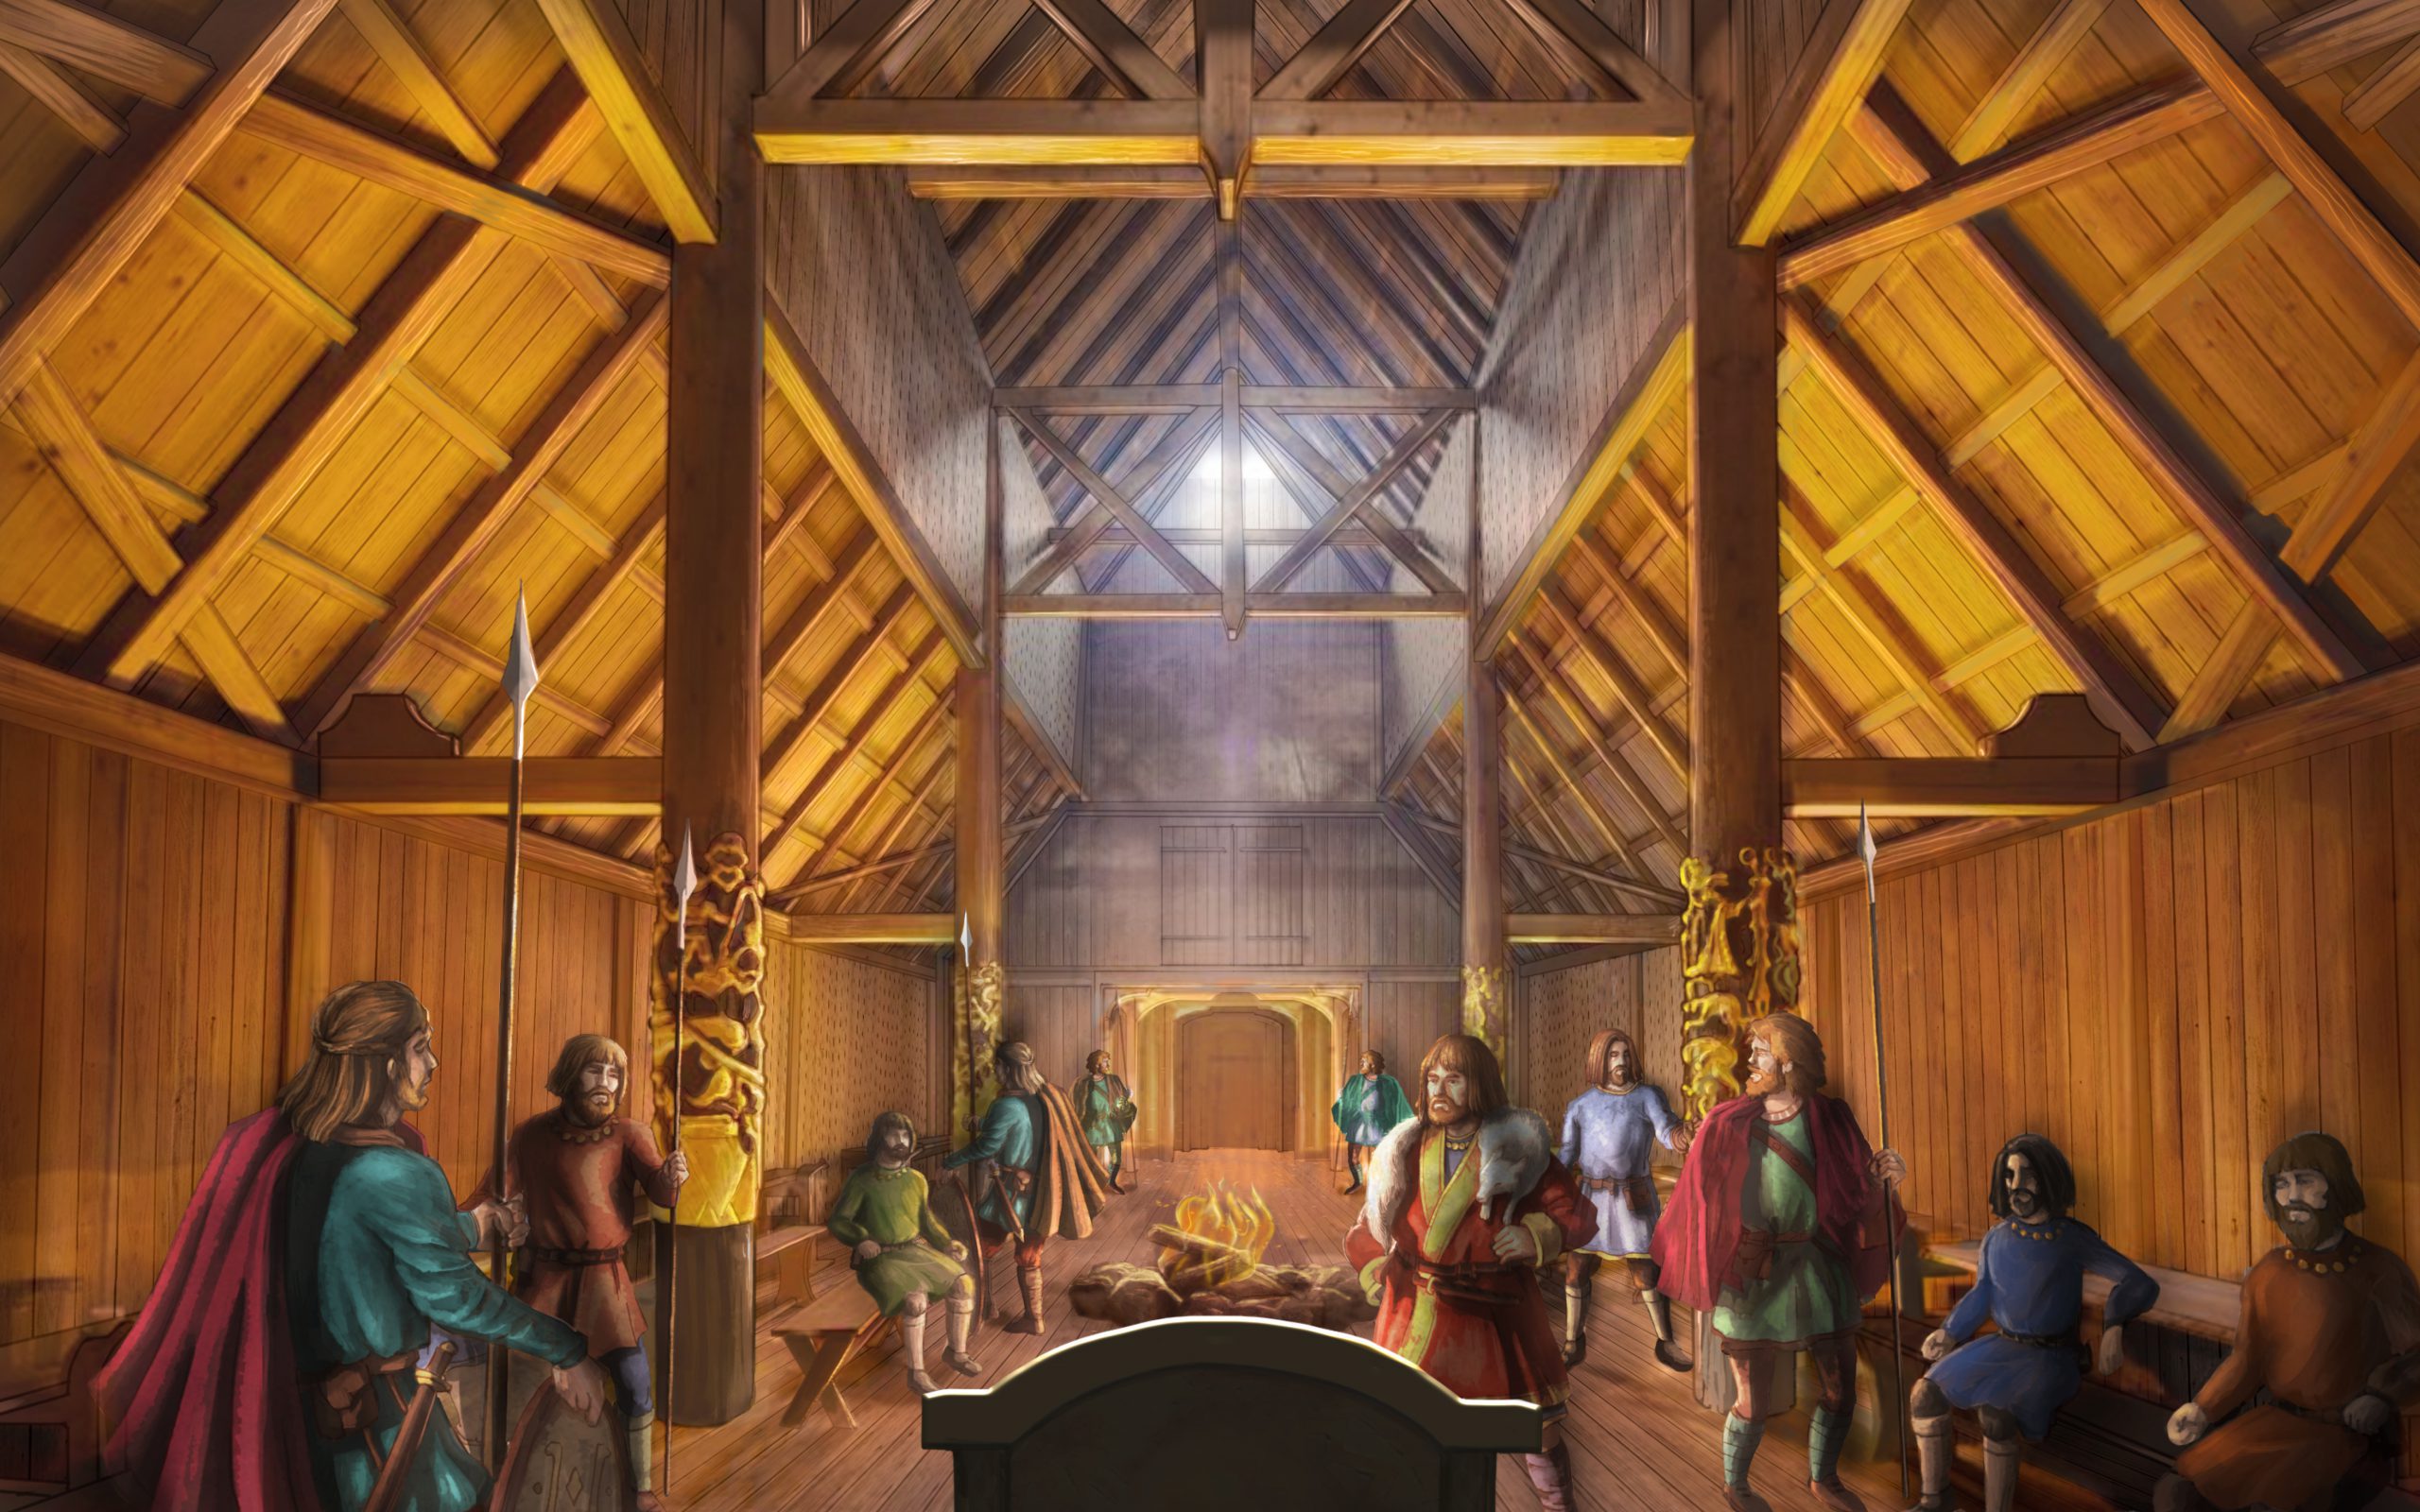 Concept image of people in a large shed like building